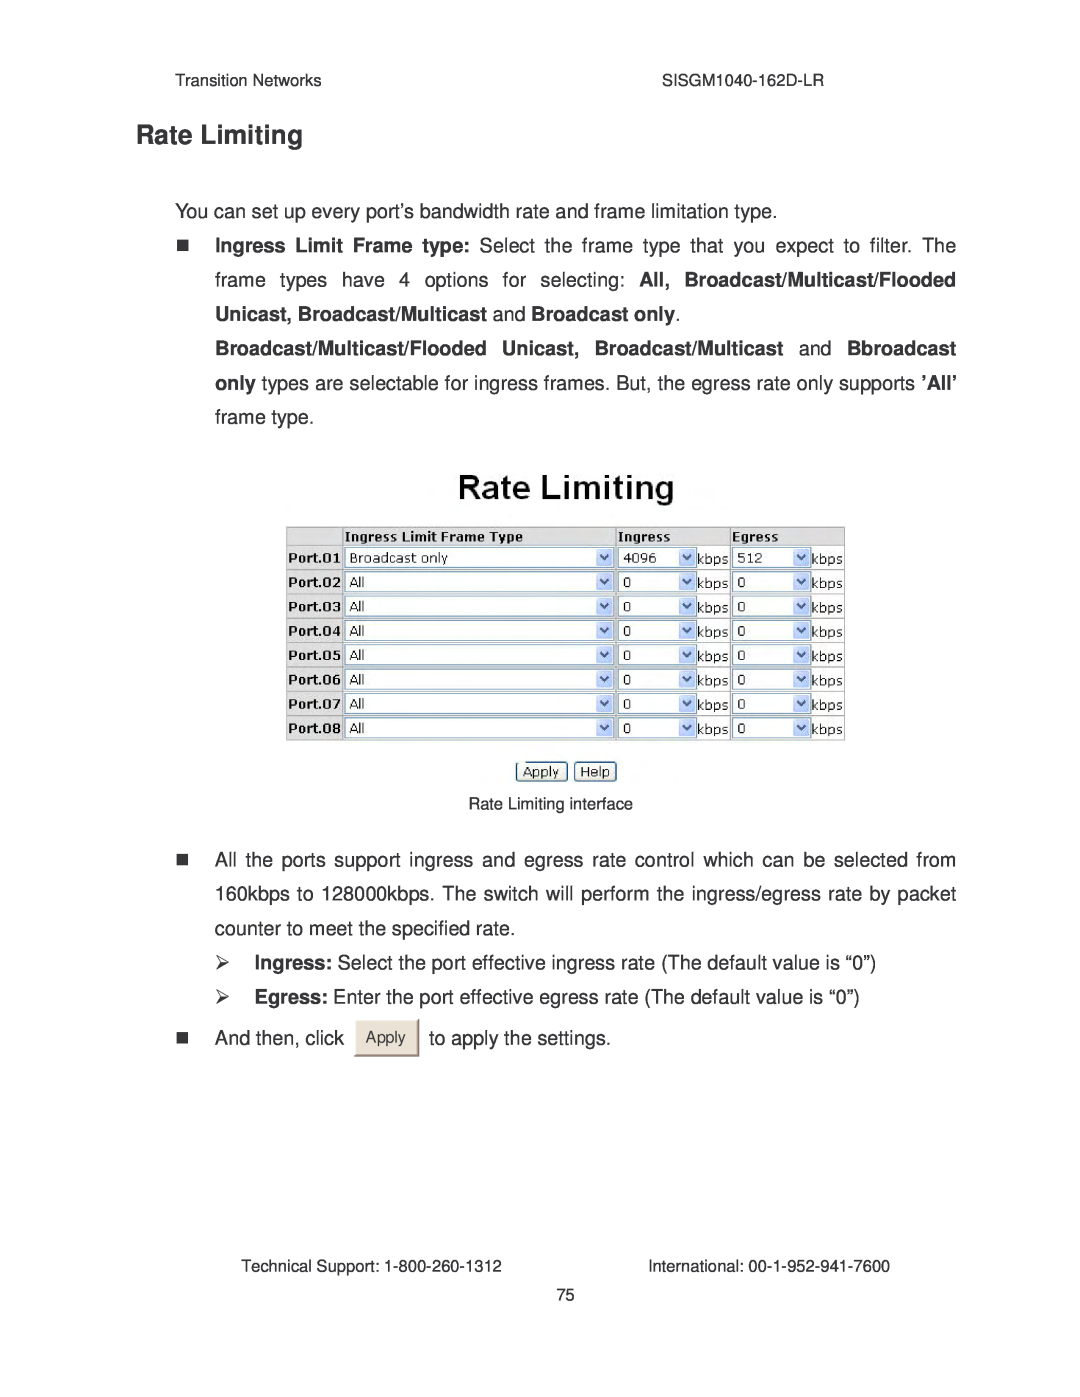 Transition Networks SISGM1040-162D manual Rate Limiting 